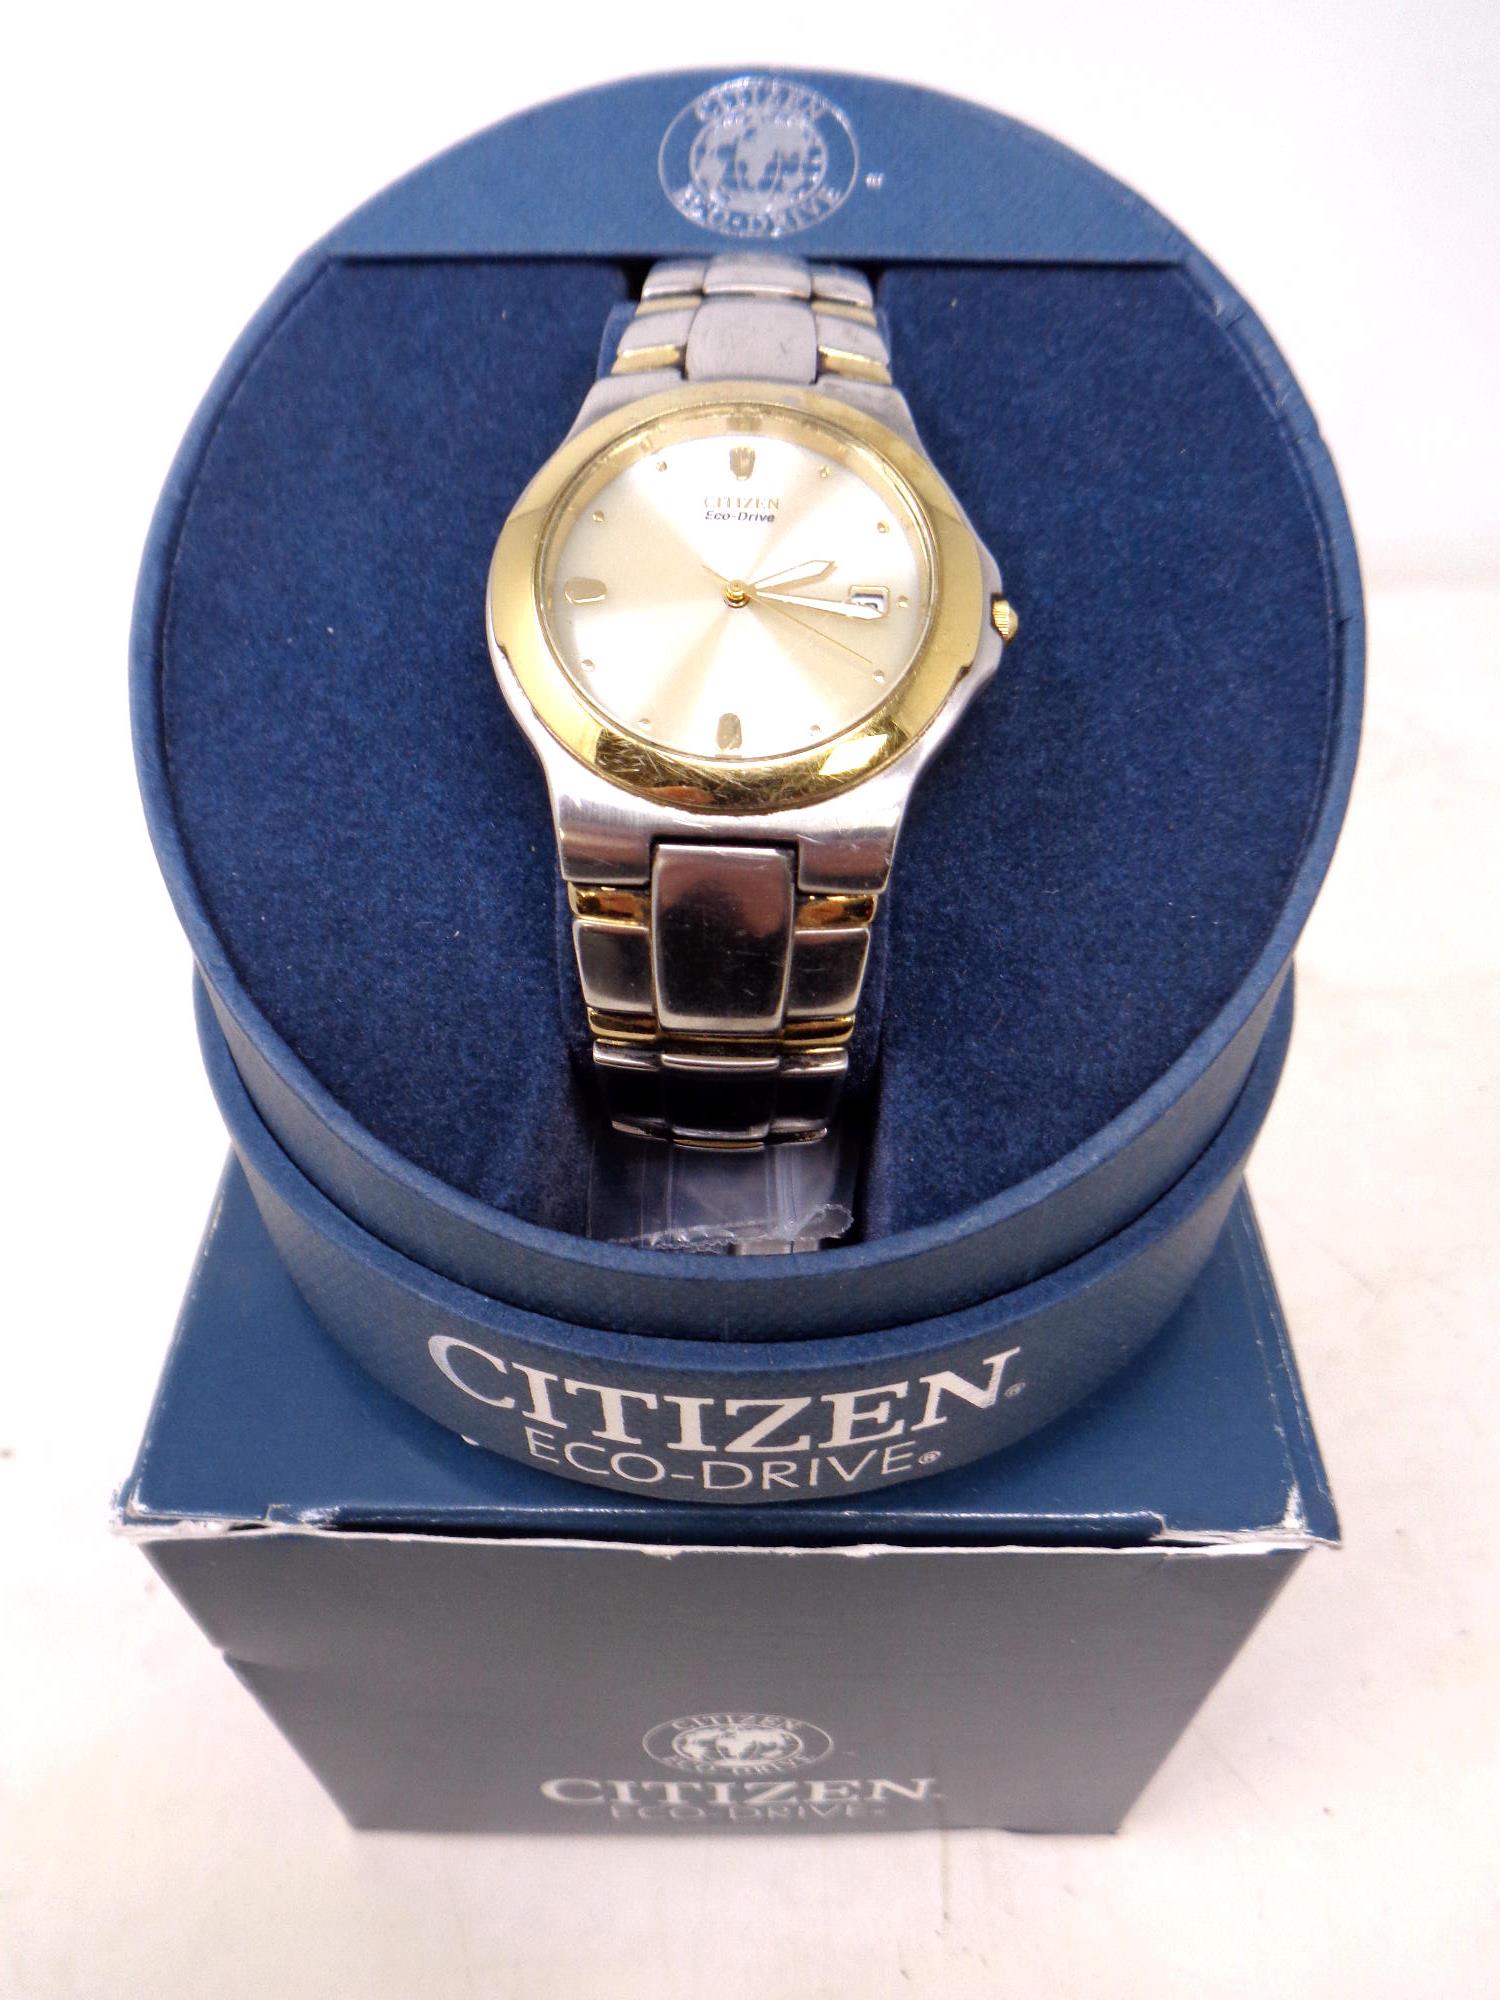 A Citizen gold plated and stainless steel wrist watch in box